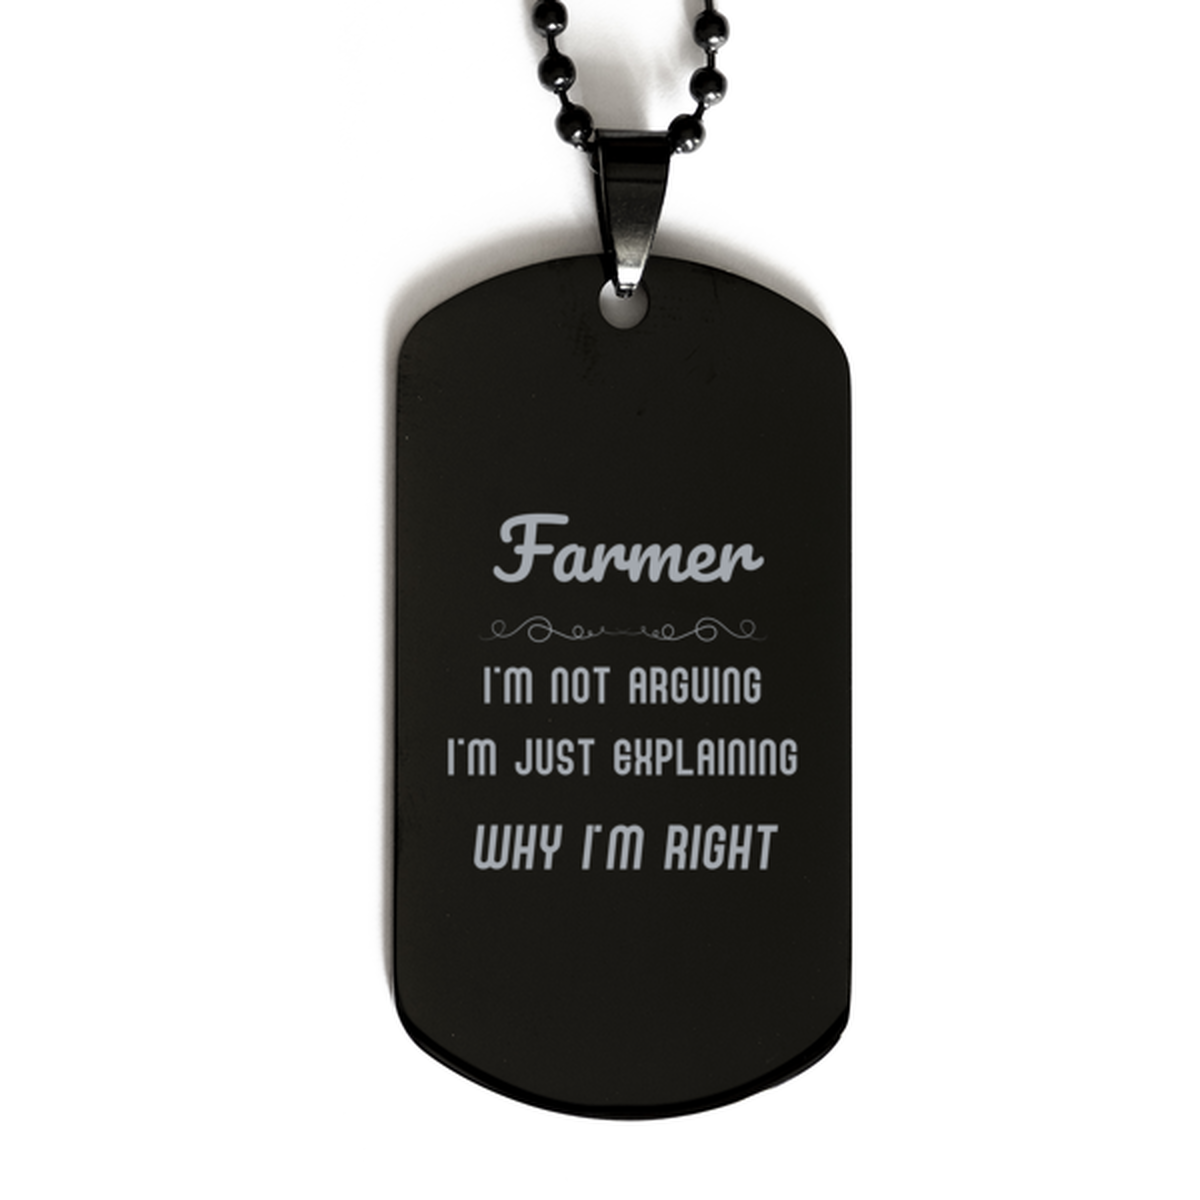 Farmer I'm not Arguing. I'm Just Explaining Why I'm RIGHT Black Dog Tag, Funny Saying Quote Farmer Gifts For Farmer Graduation Birthday Christmas Gifts for Men Women Coworker